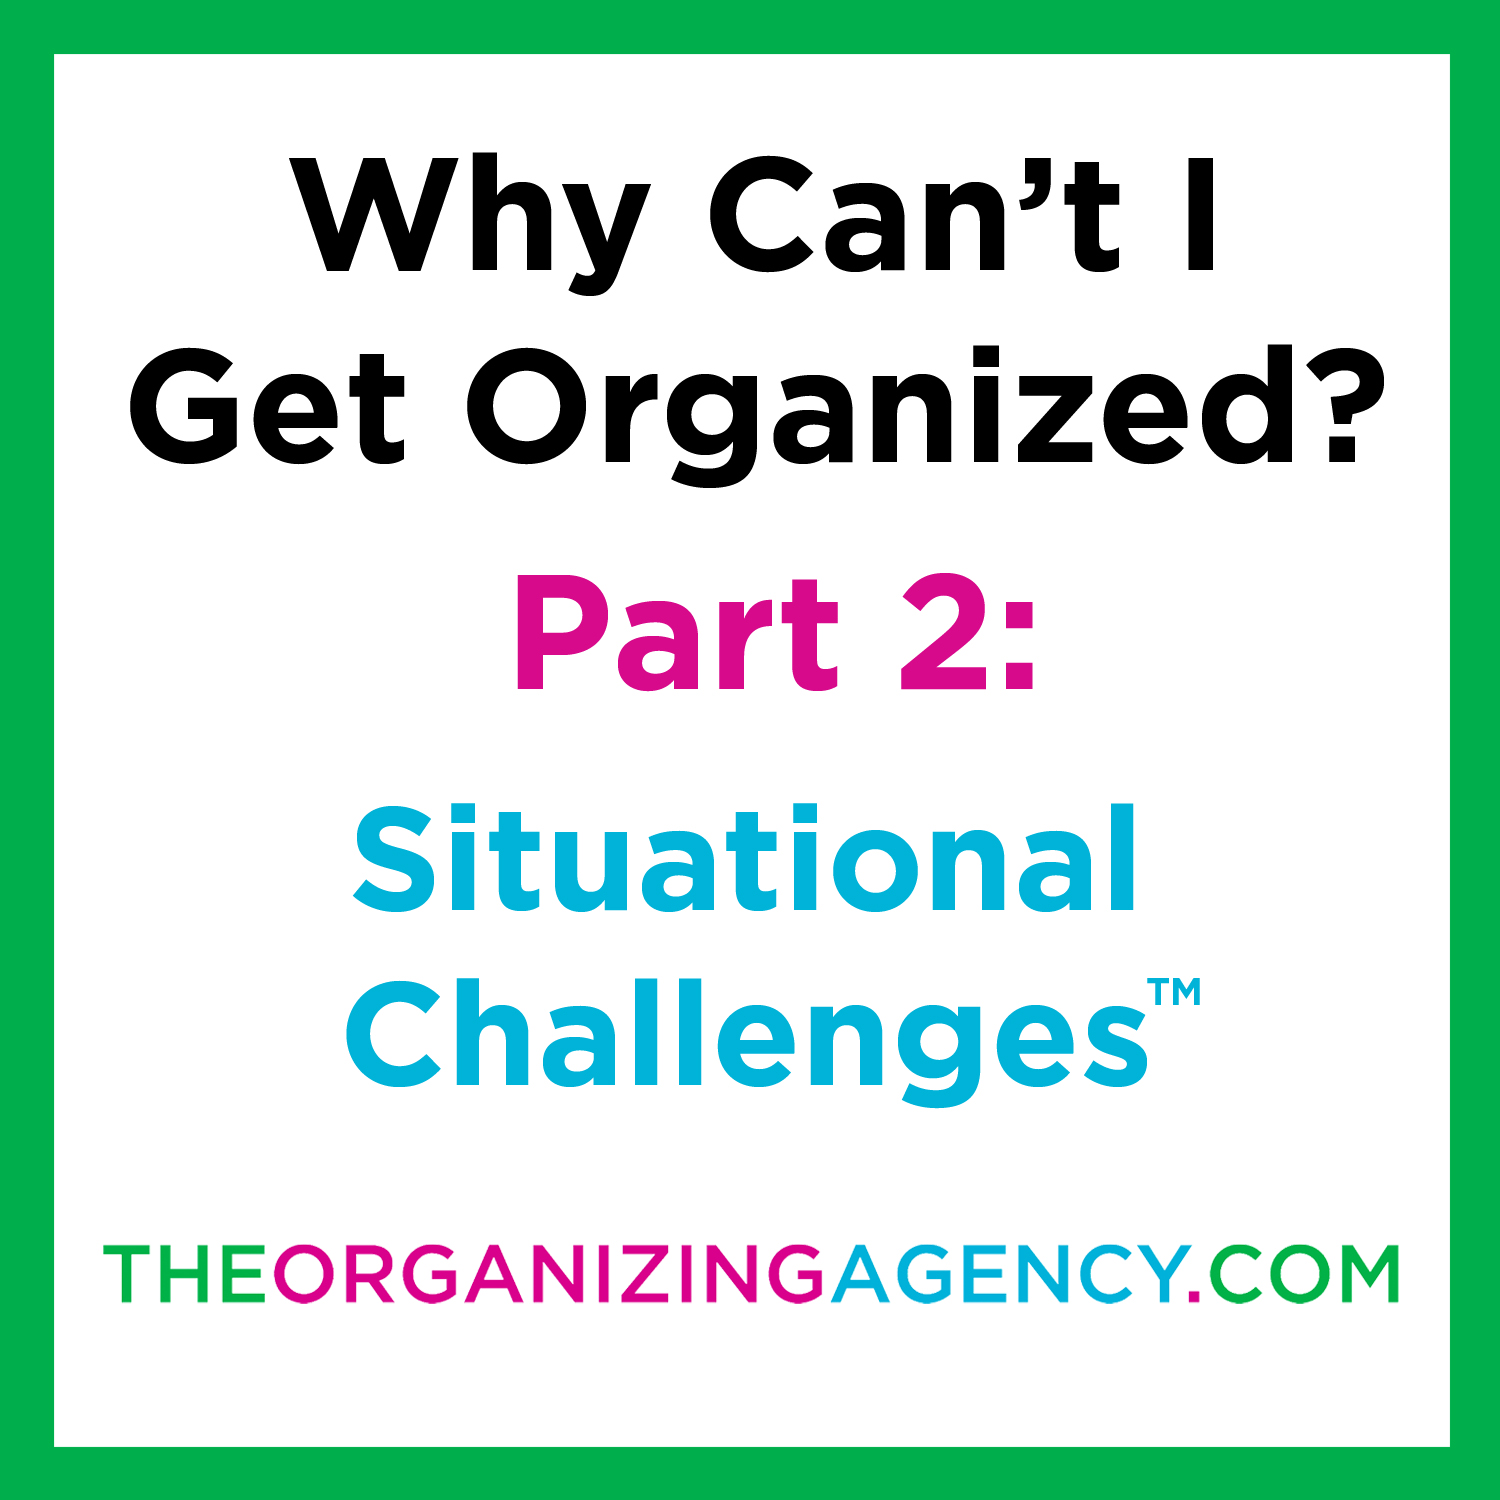 Get Organized Situational Challenges